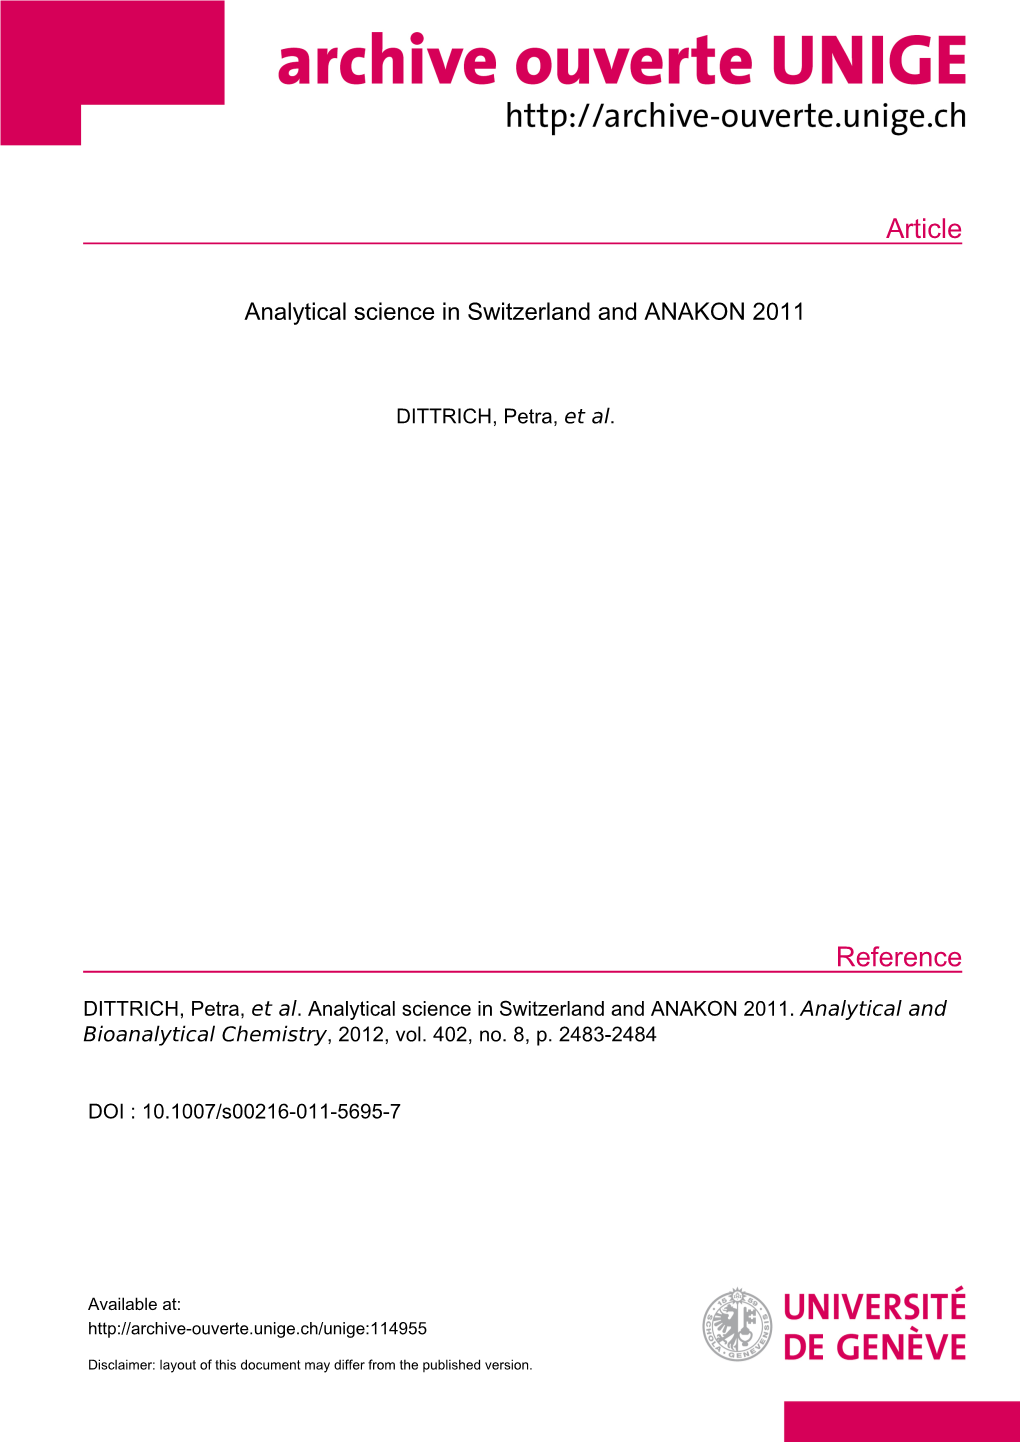 Analytical Science in Switzerland and ANAKON 2011